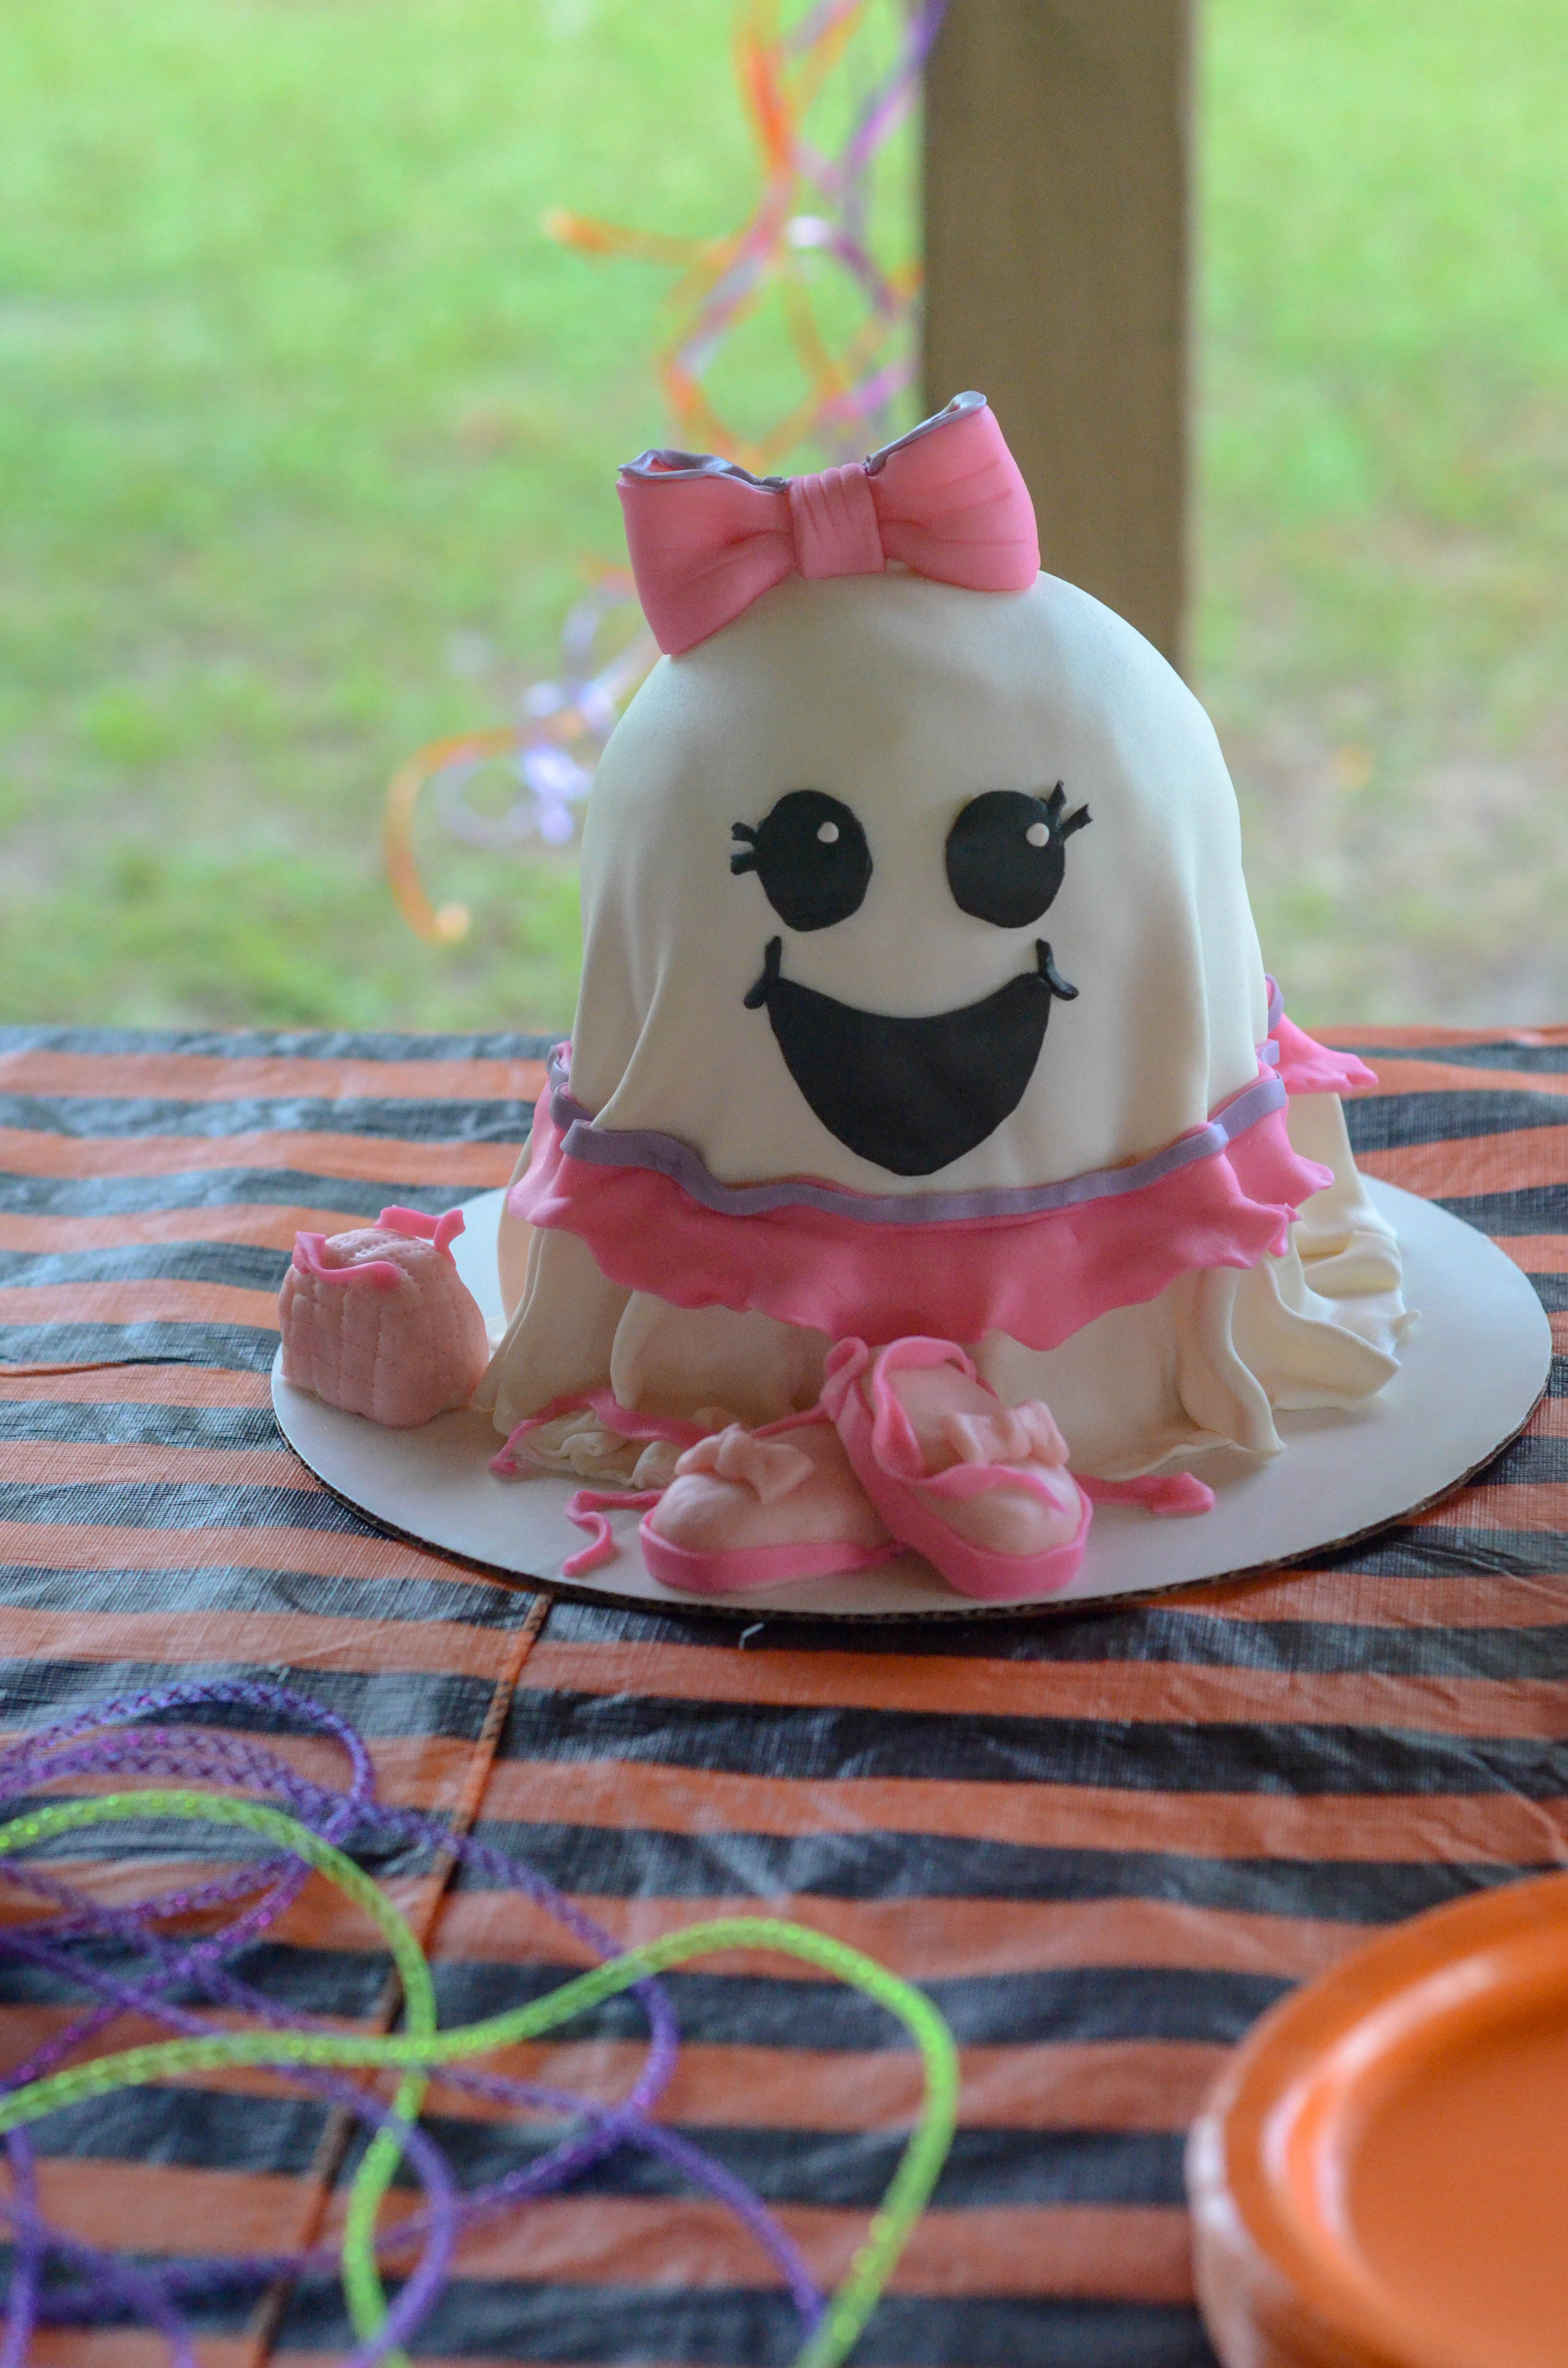 This Boo-llerina birthday party will delight the youngest of birthday party guests! - The Gifted Gabber #fall #birthday #Halloween